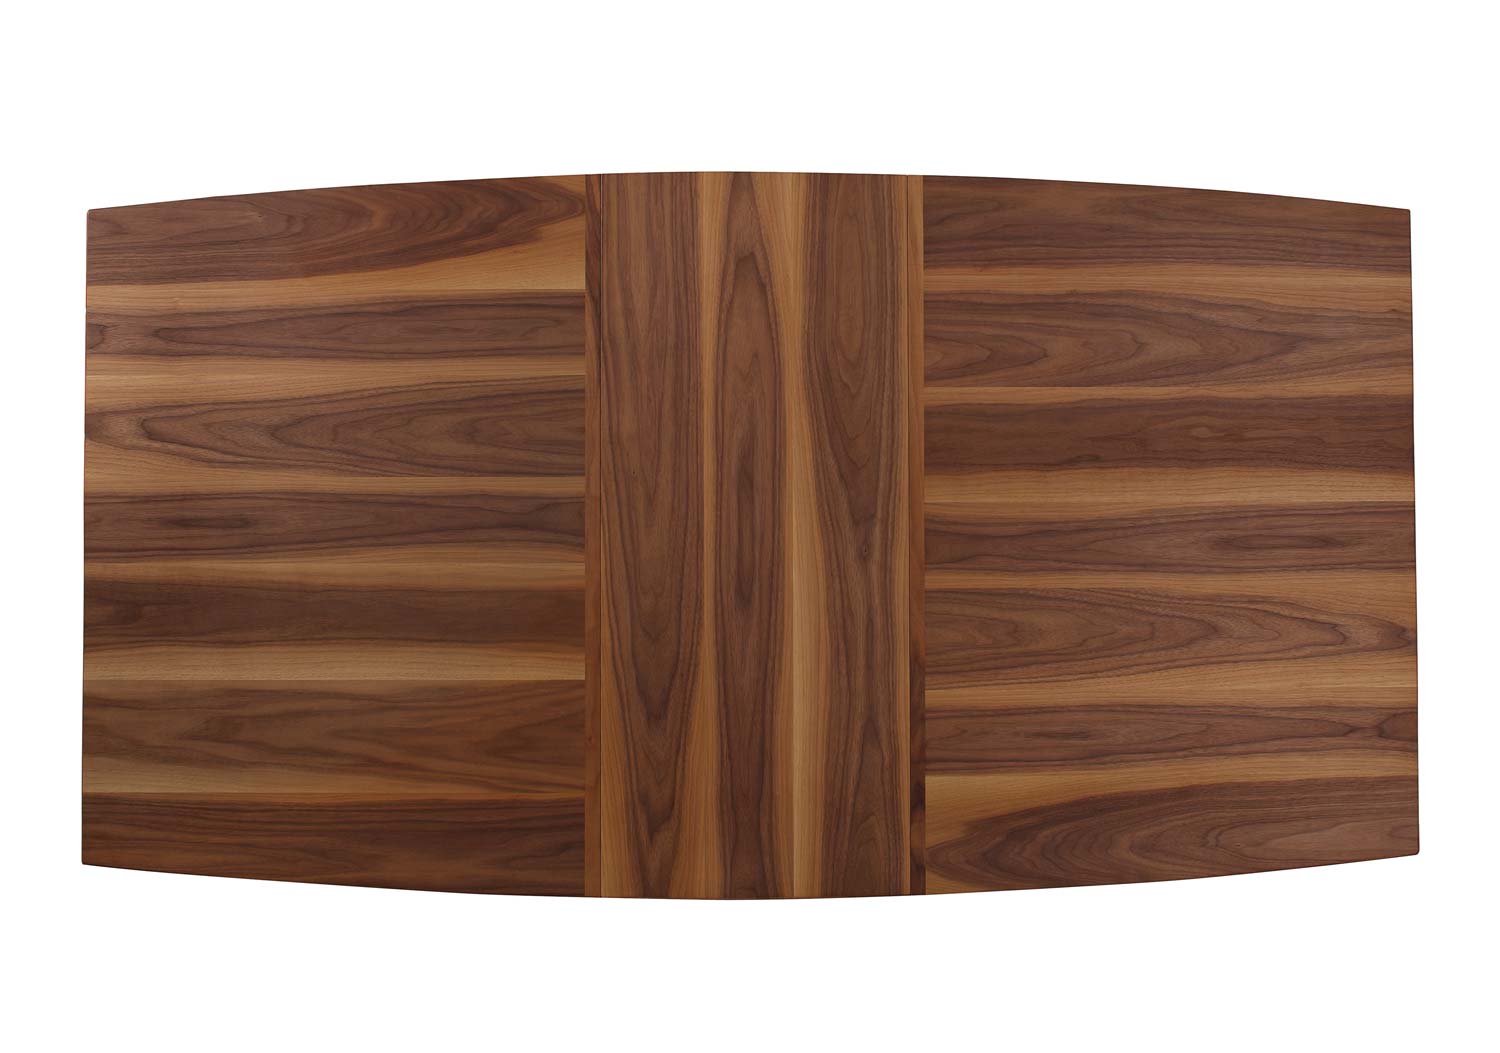 Homelegance Compson Dining Table - Natural/Walnut